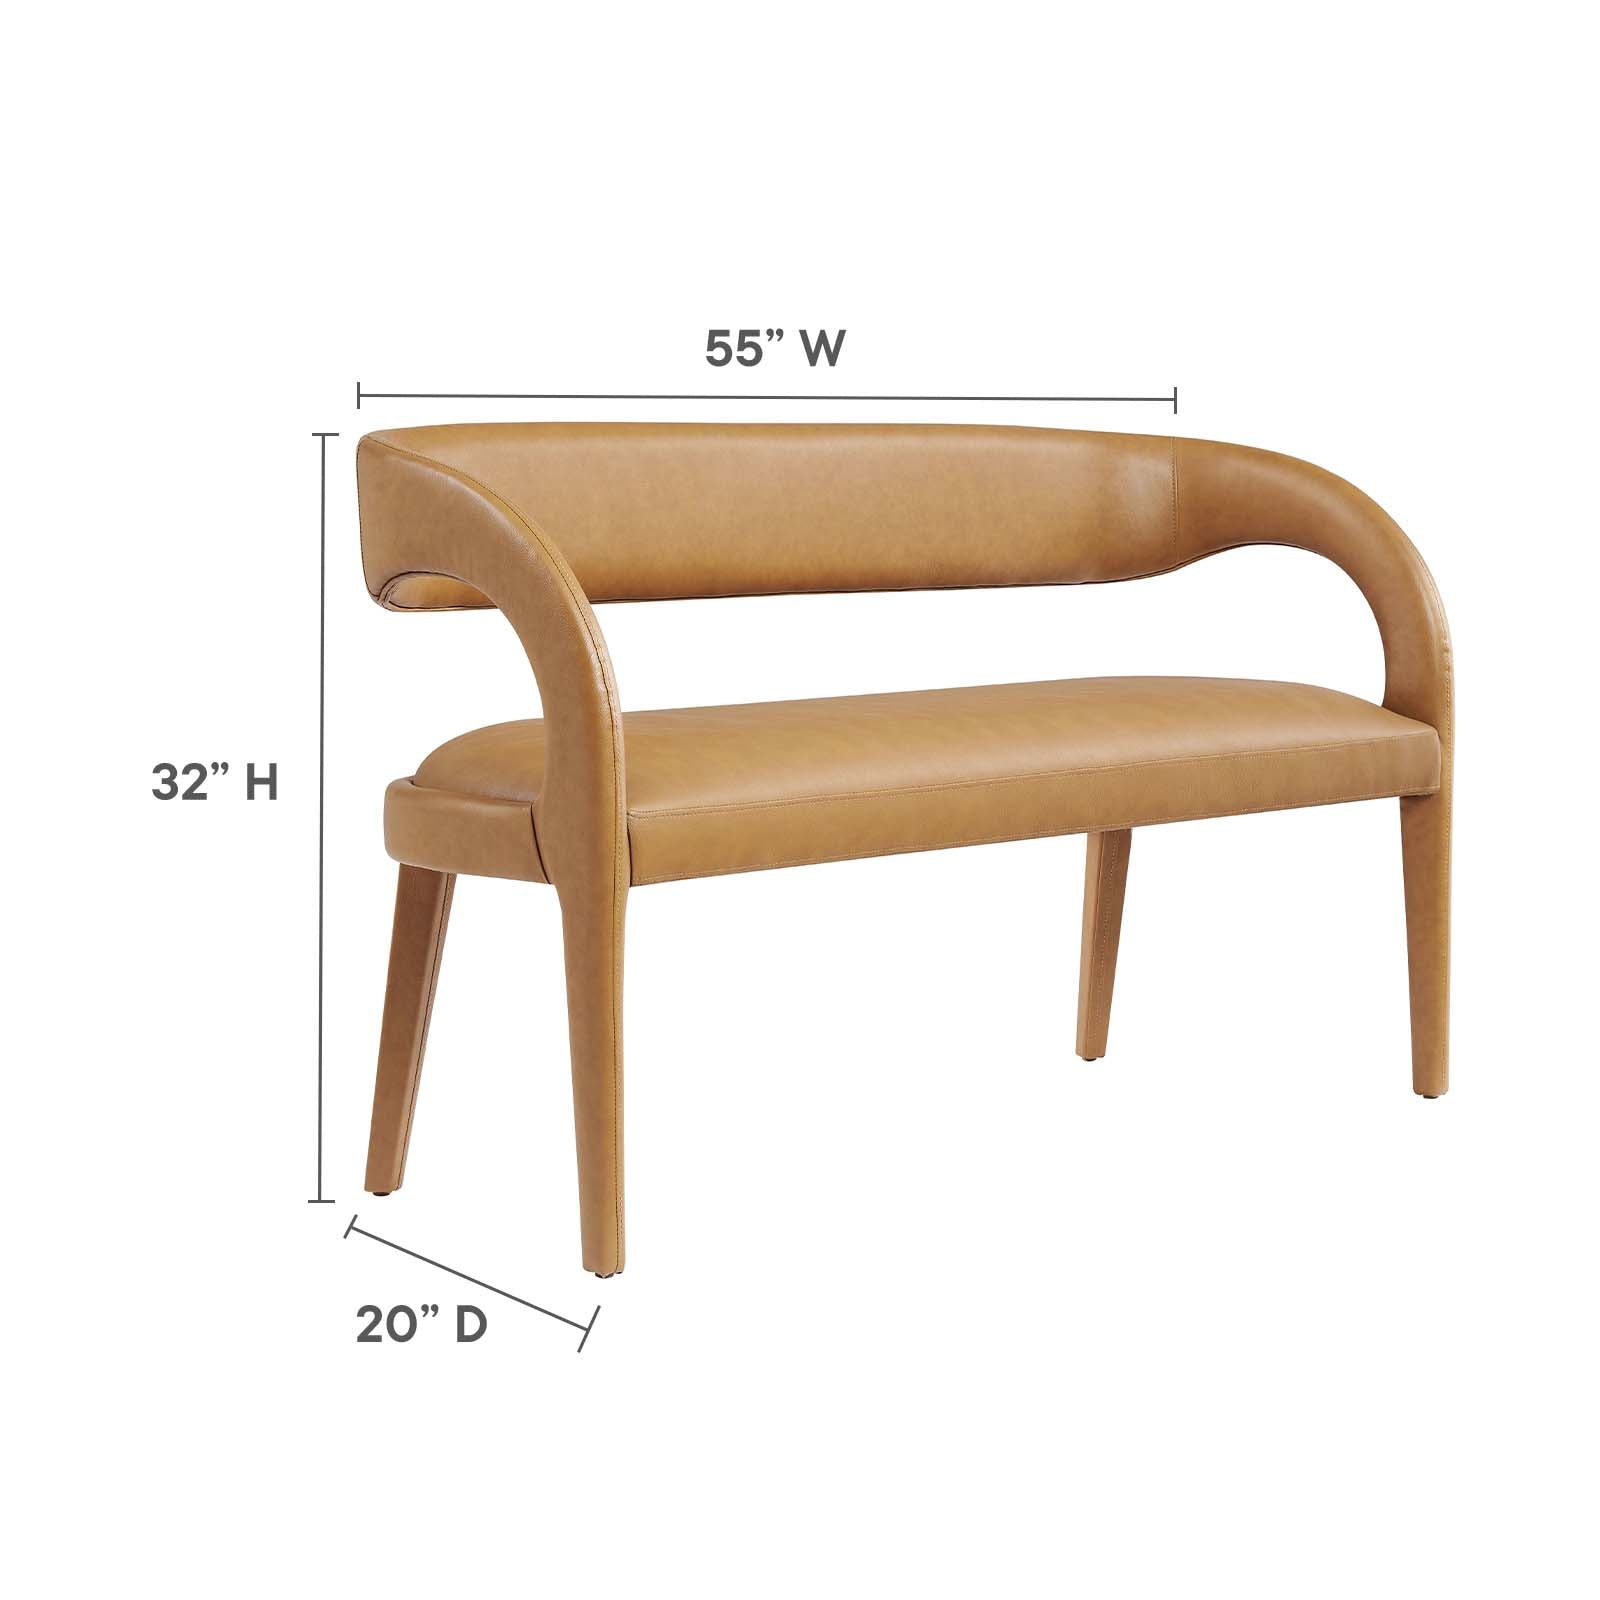 Pinnacle Vegan Leather Accent Bench